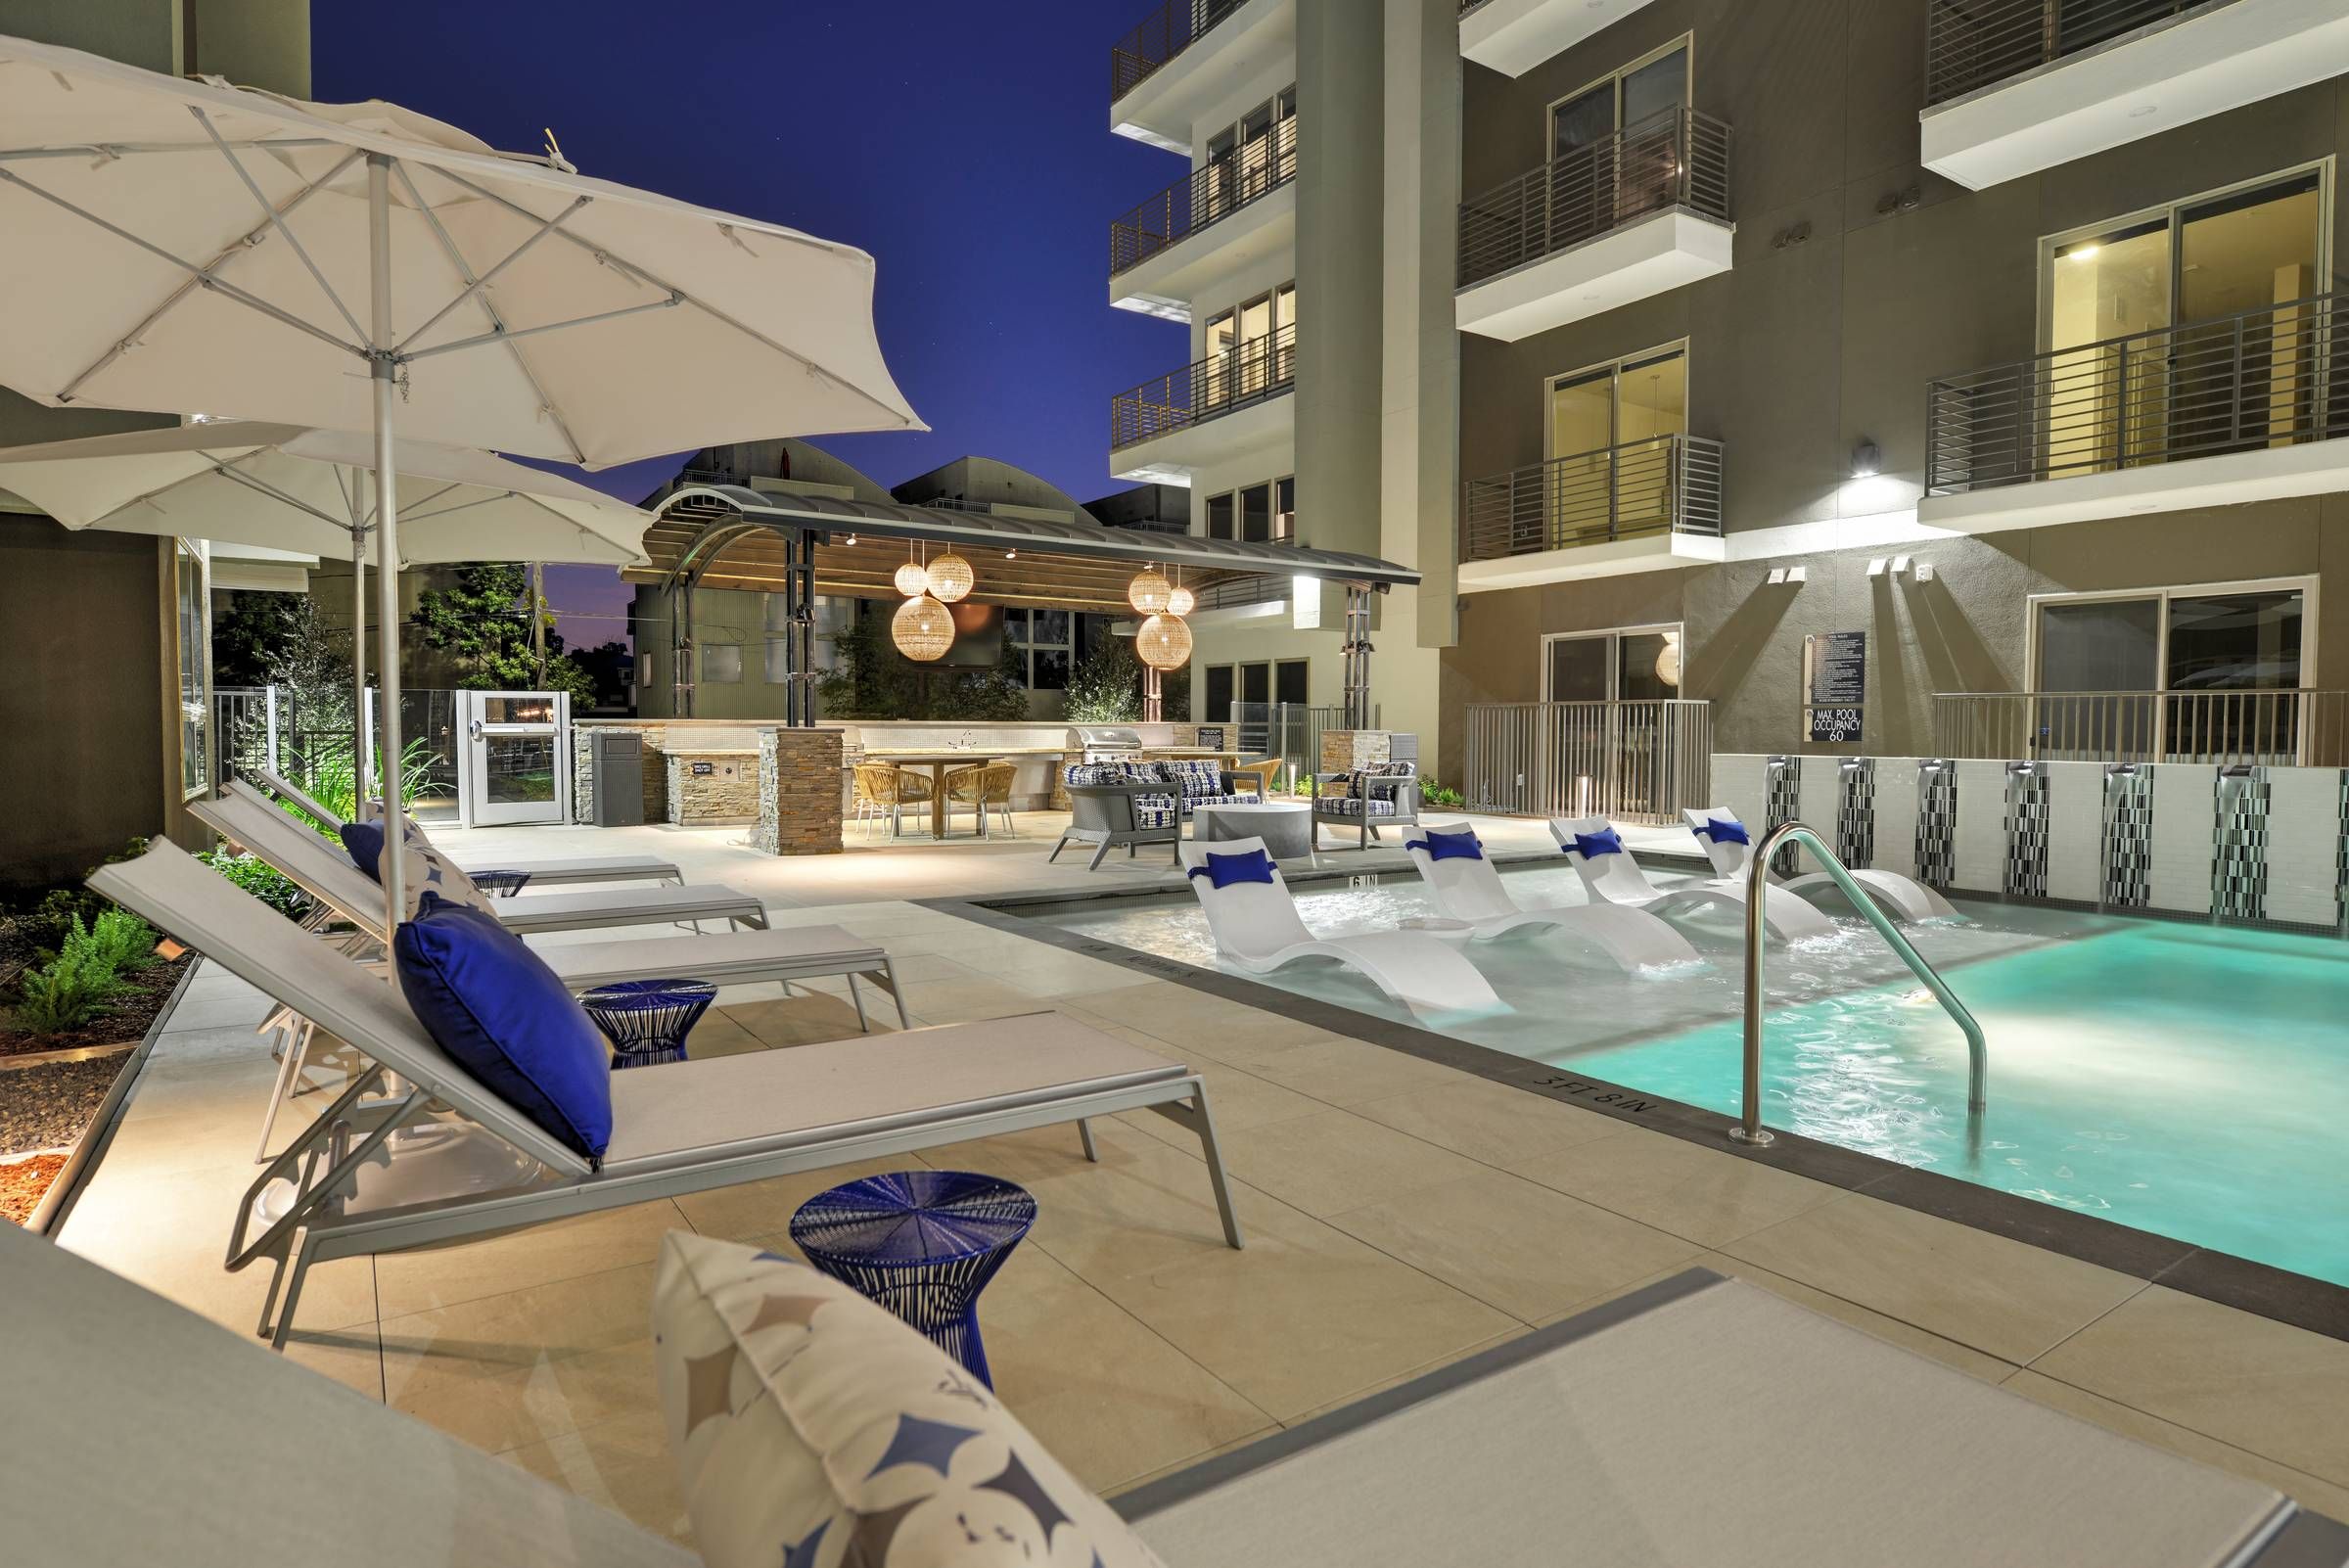 A tranquil evening pool scene at Alta West Gray, with white loungers under umbrellas and a warmly lit outdoor kitchen and dining area in the background.